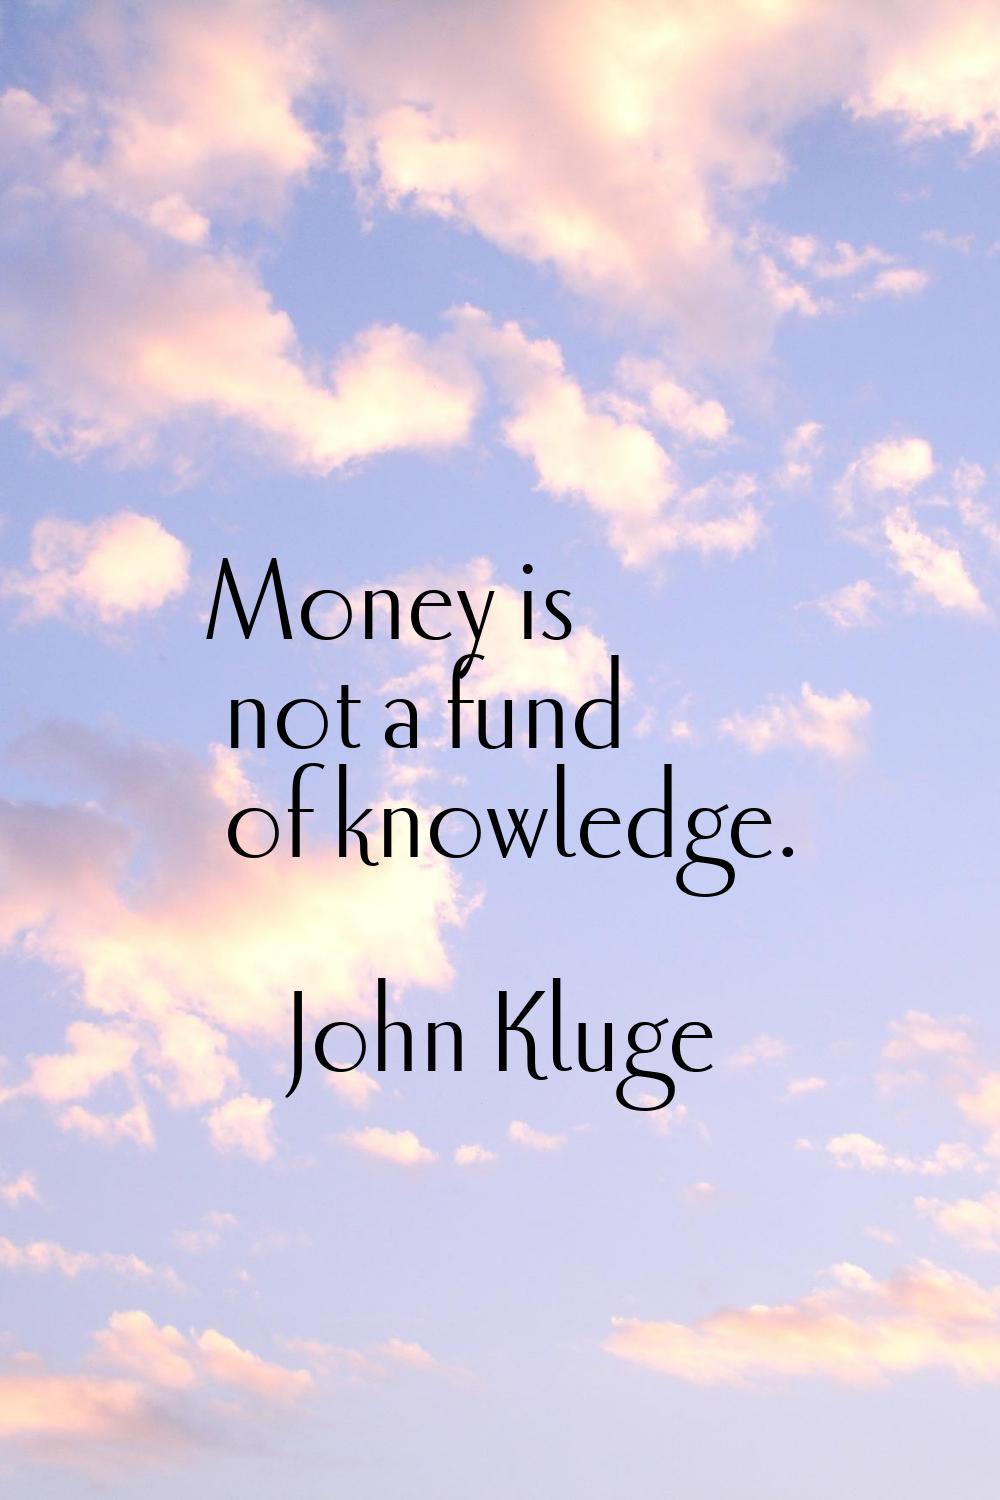 Money is not a fund of knowledge.